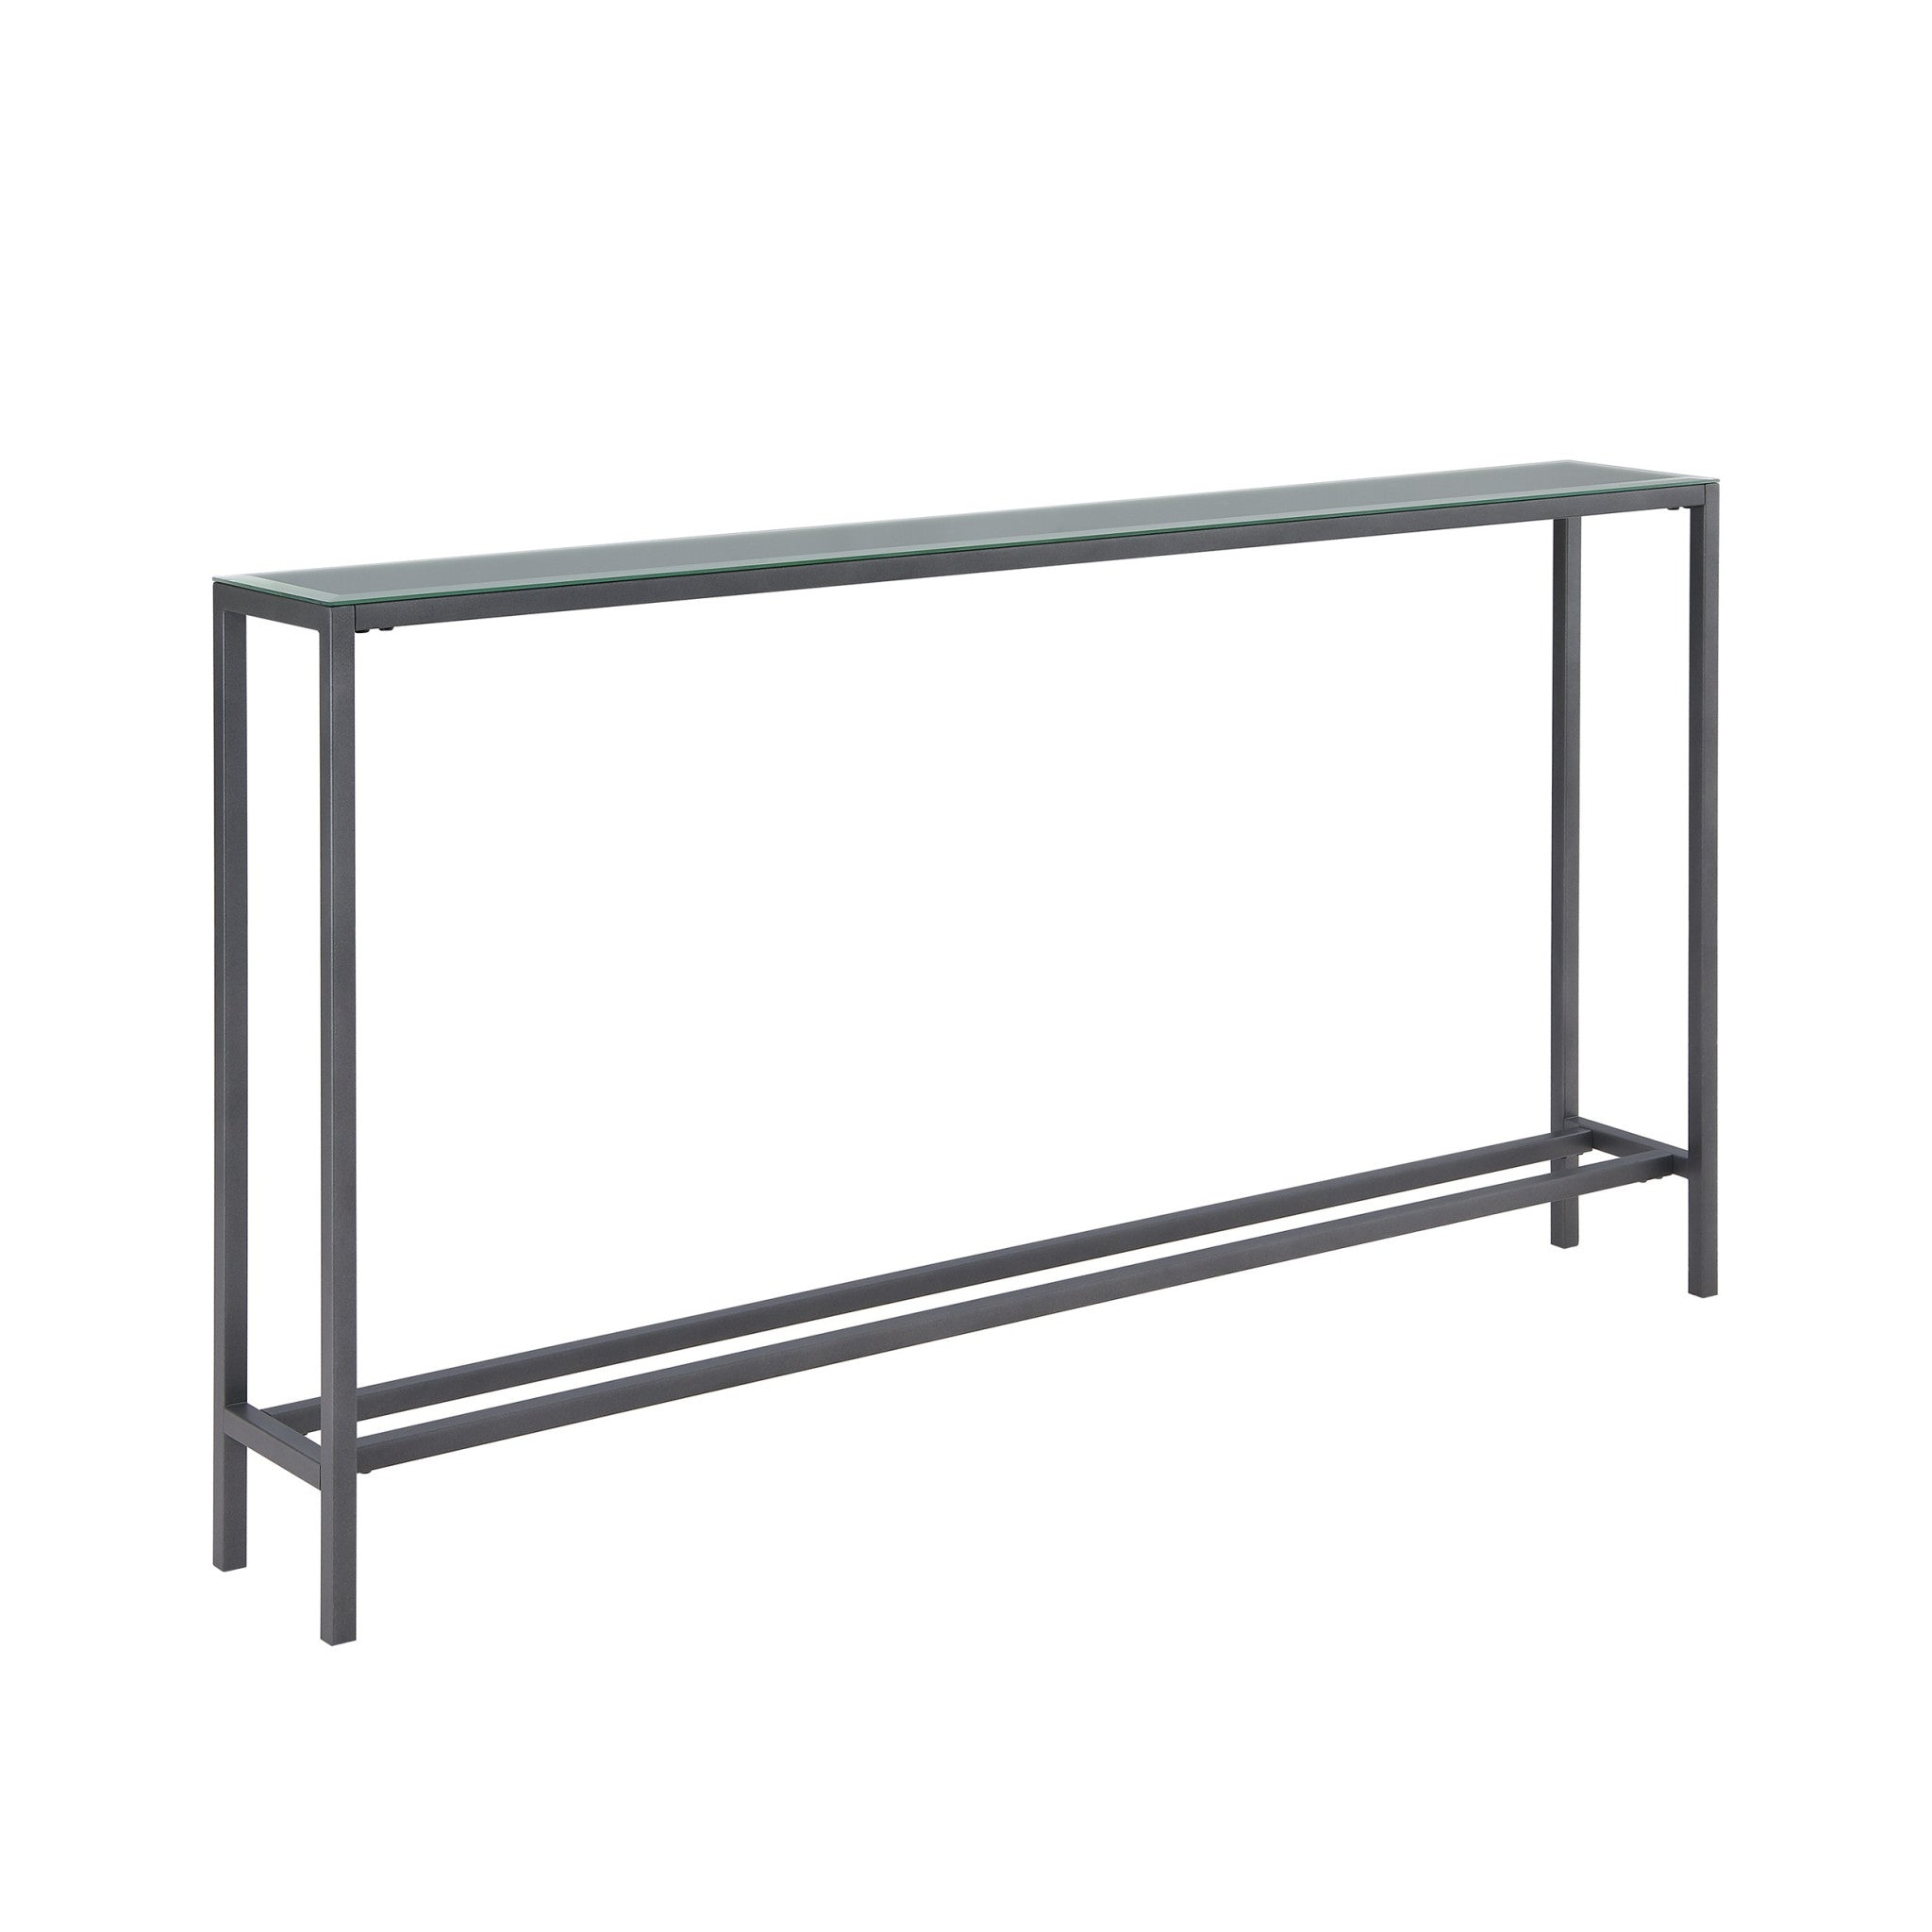 56" Black and Gunmetal Mirrored Glass Console Table